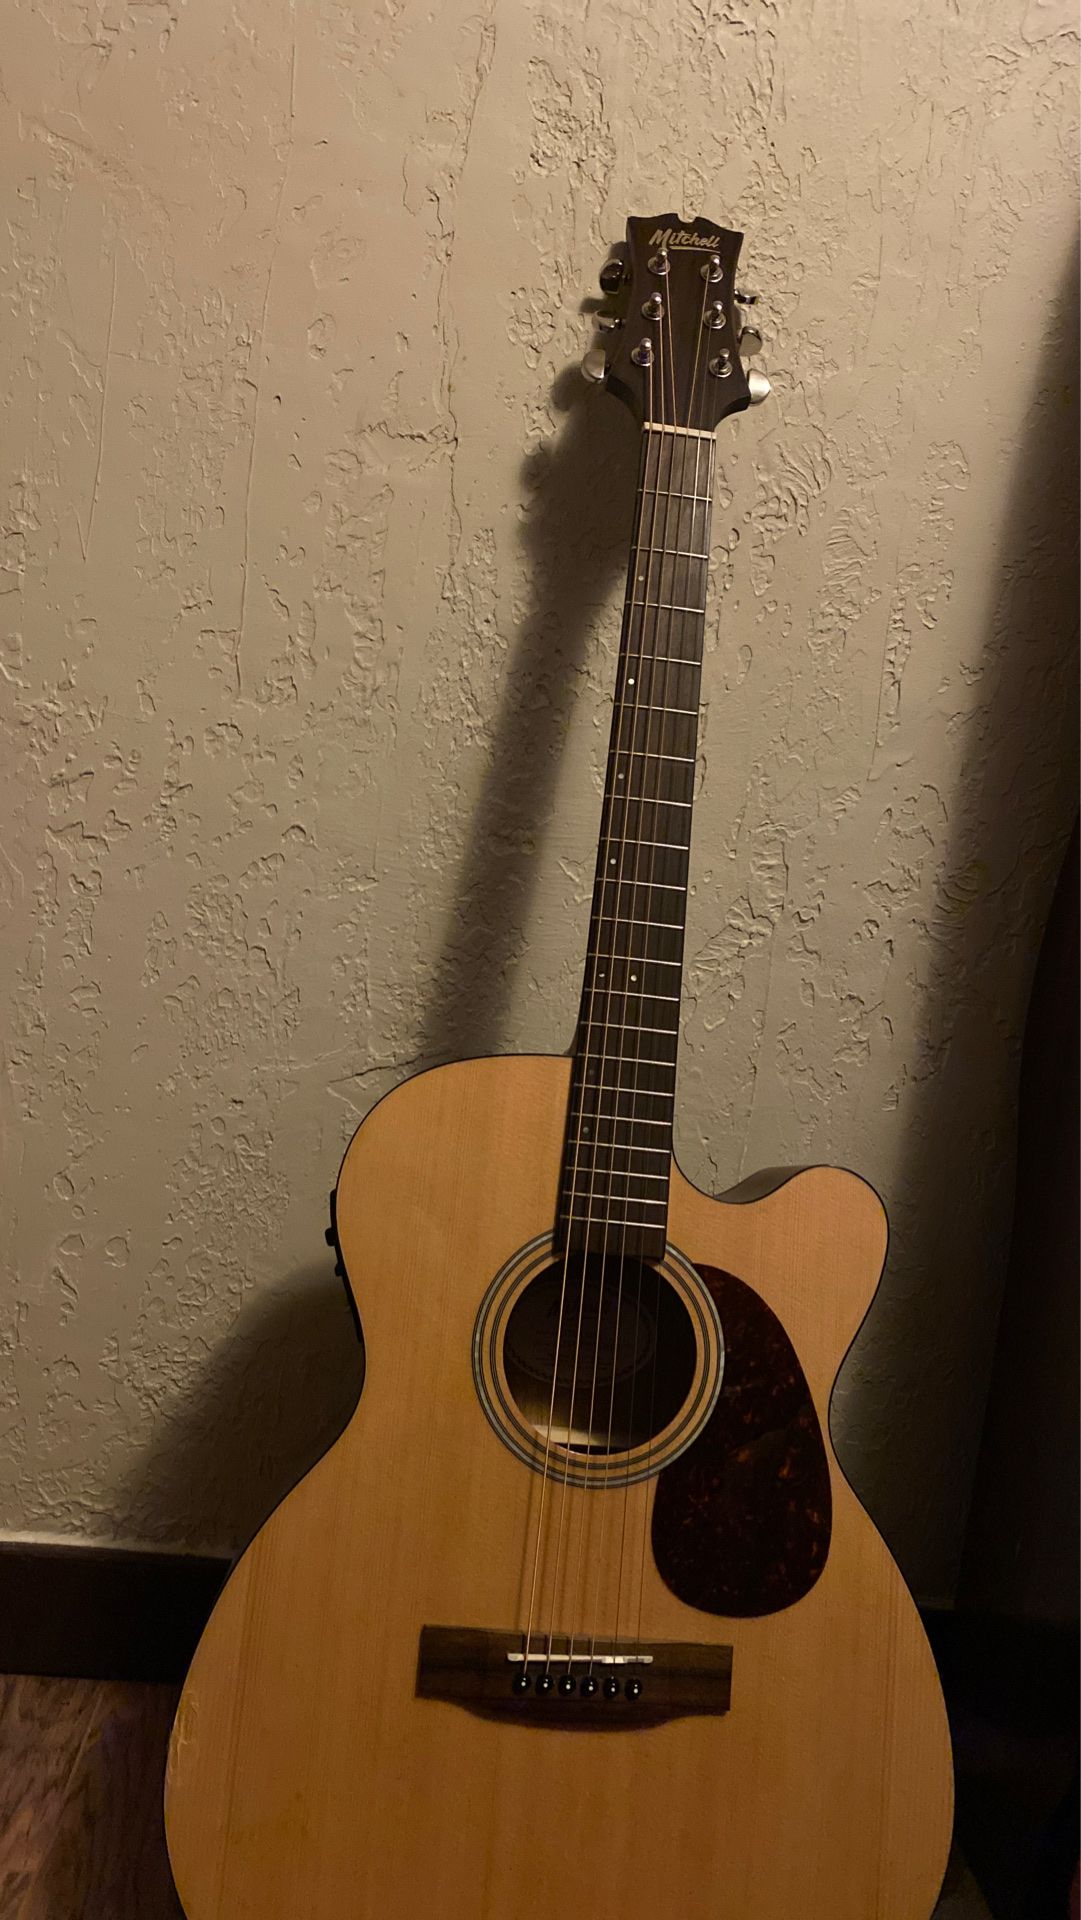 Mitchell Acoustic Guitar